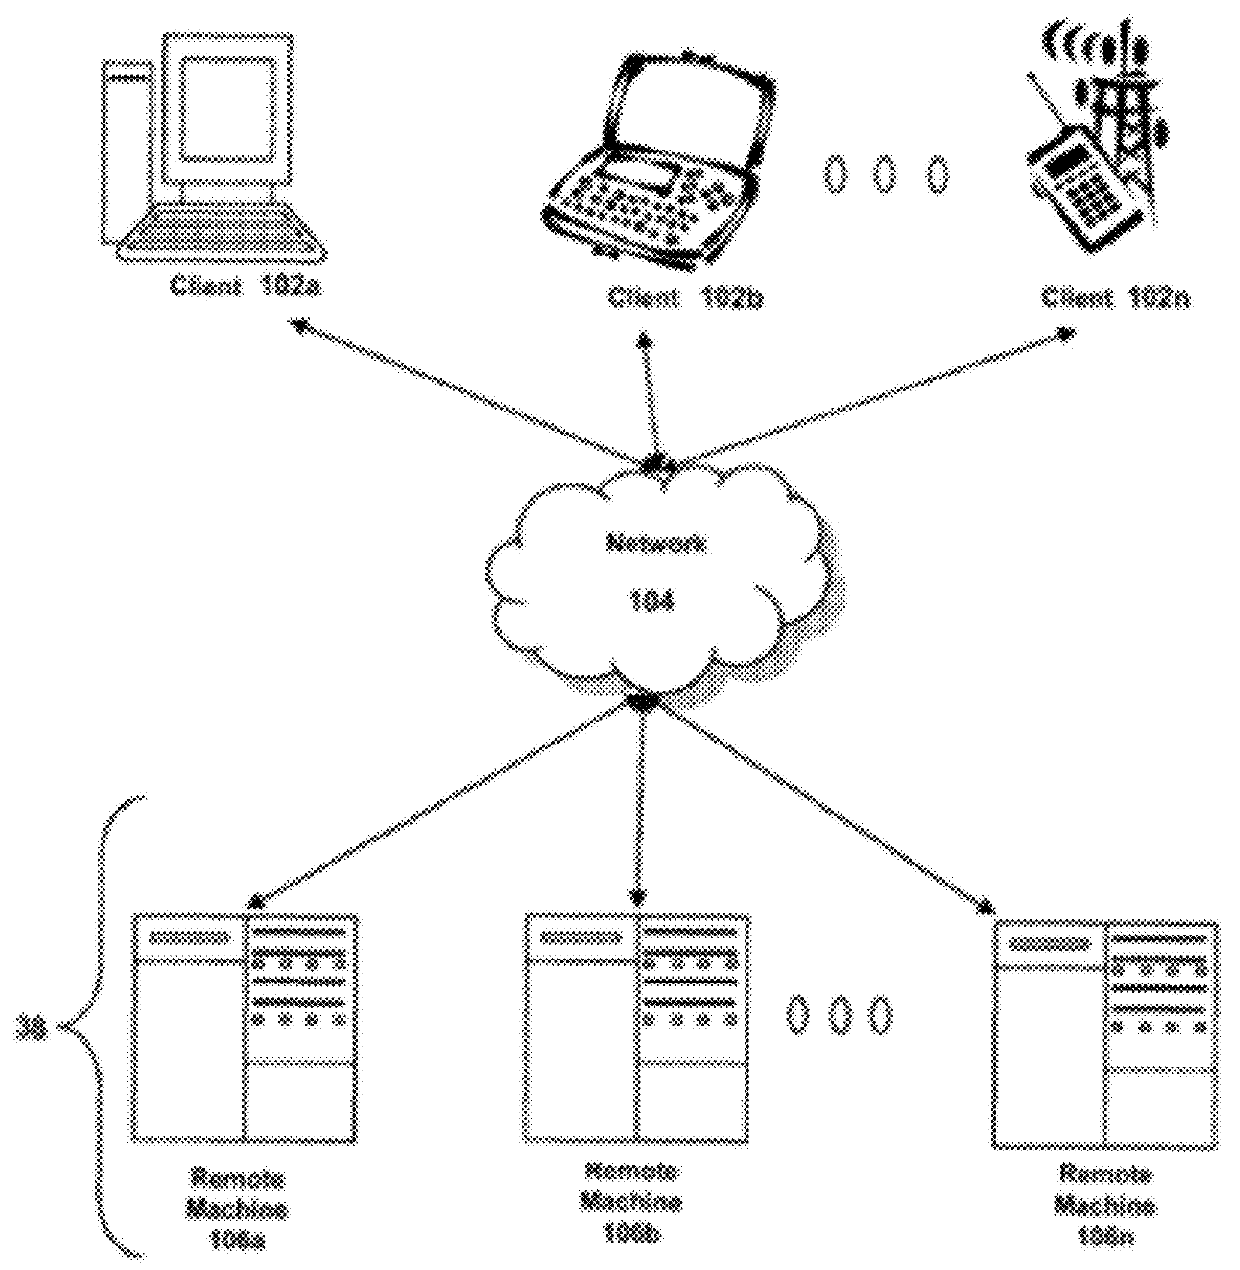 Transparent User Interface Integration Between Local and Remote Computing Environments